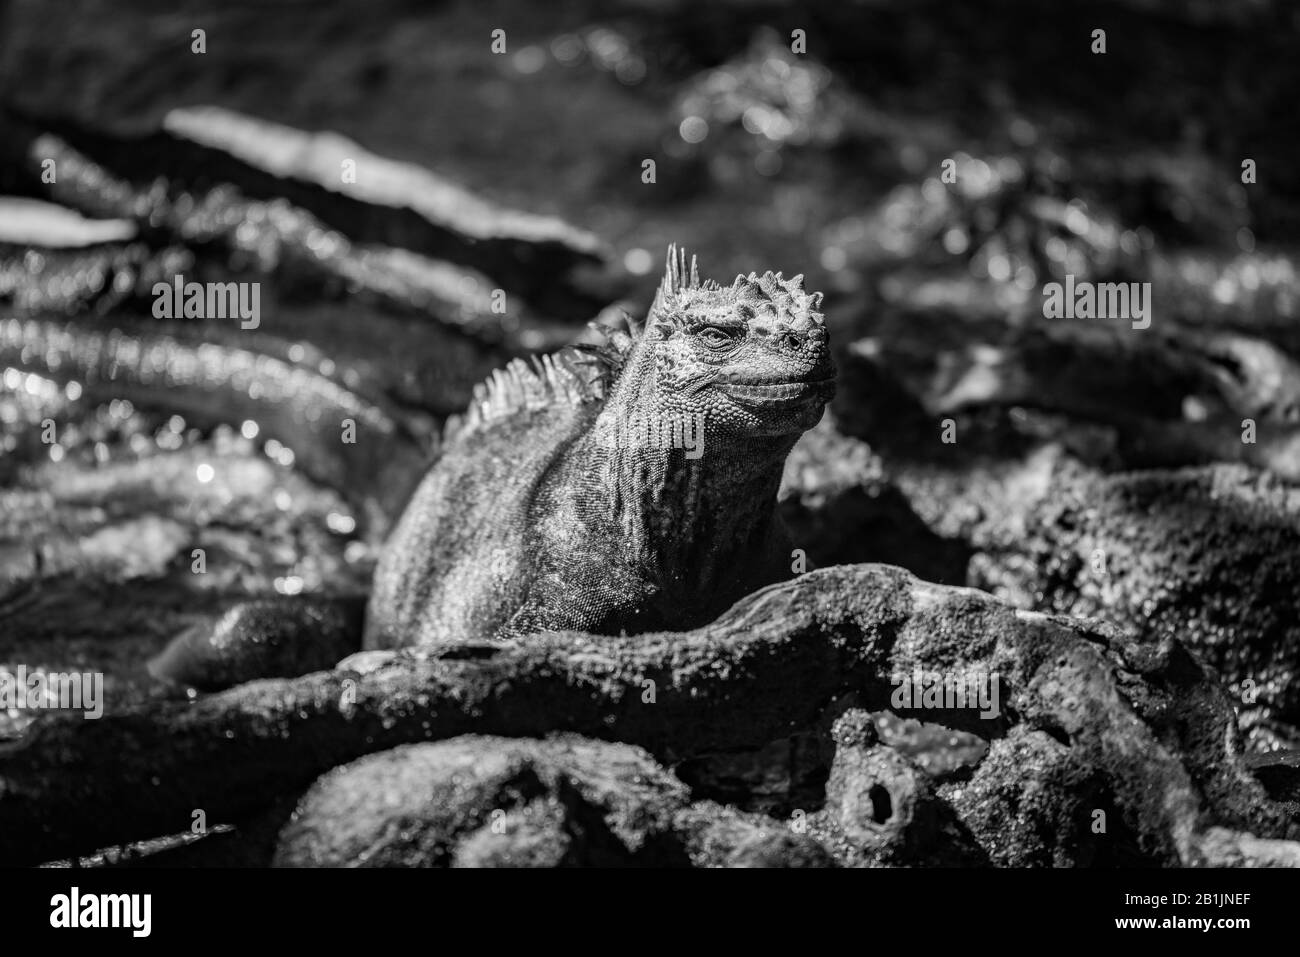 A marine iguana is lying in dappled sunlight among rocks, leaves and moss-covered tree roots. It has a scaly black skin with brown and green patches a Stock Photo